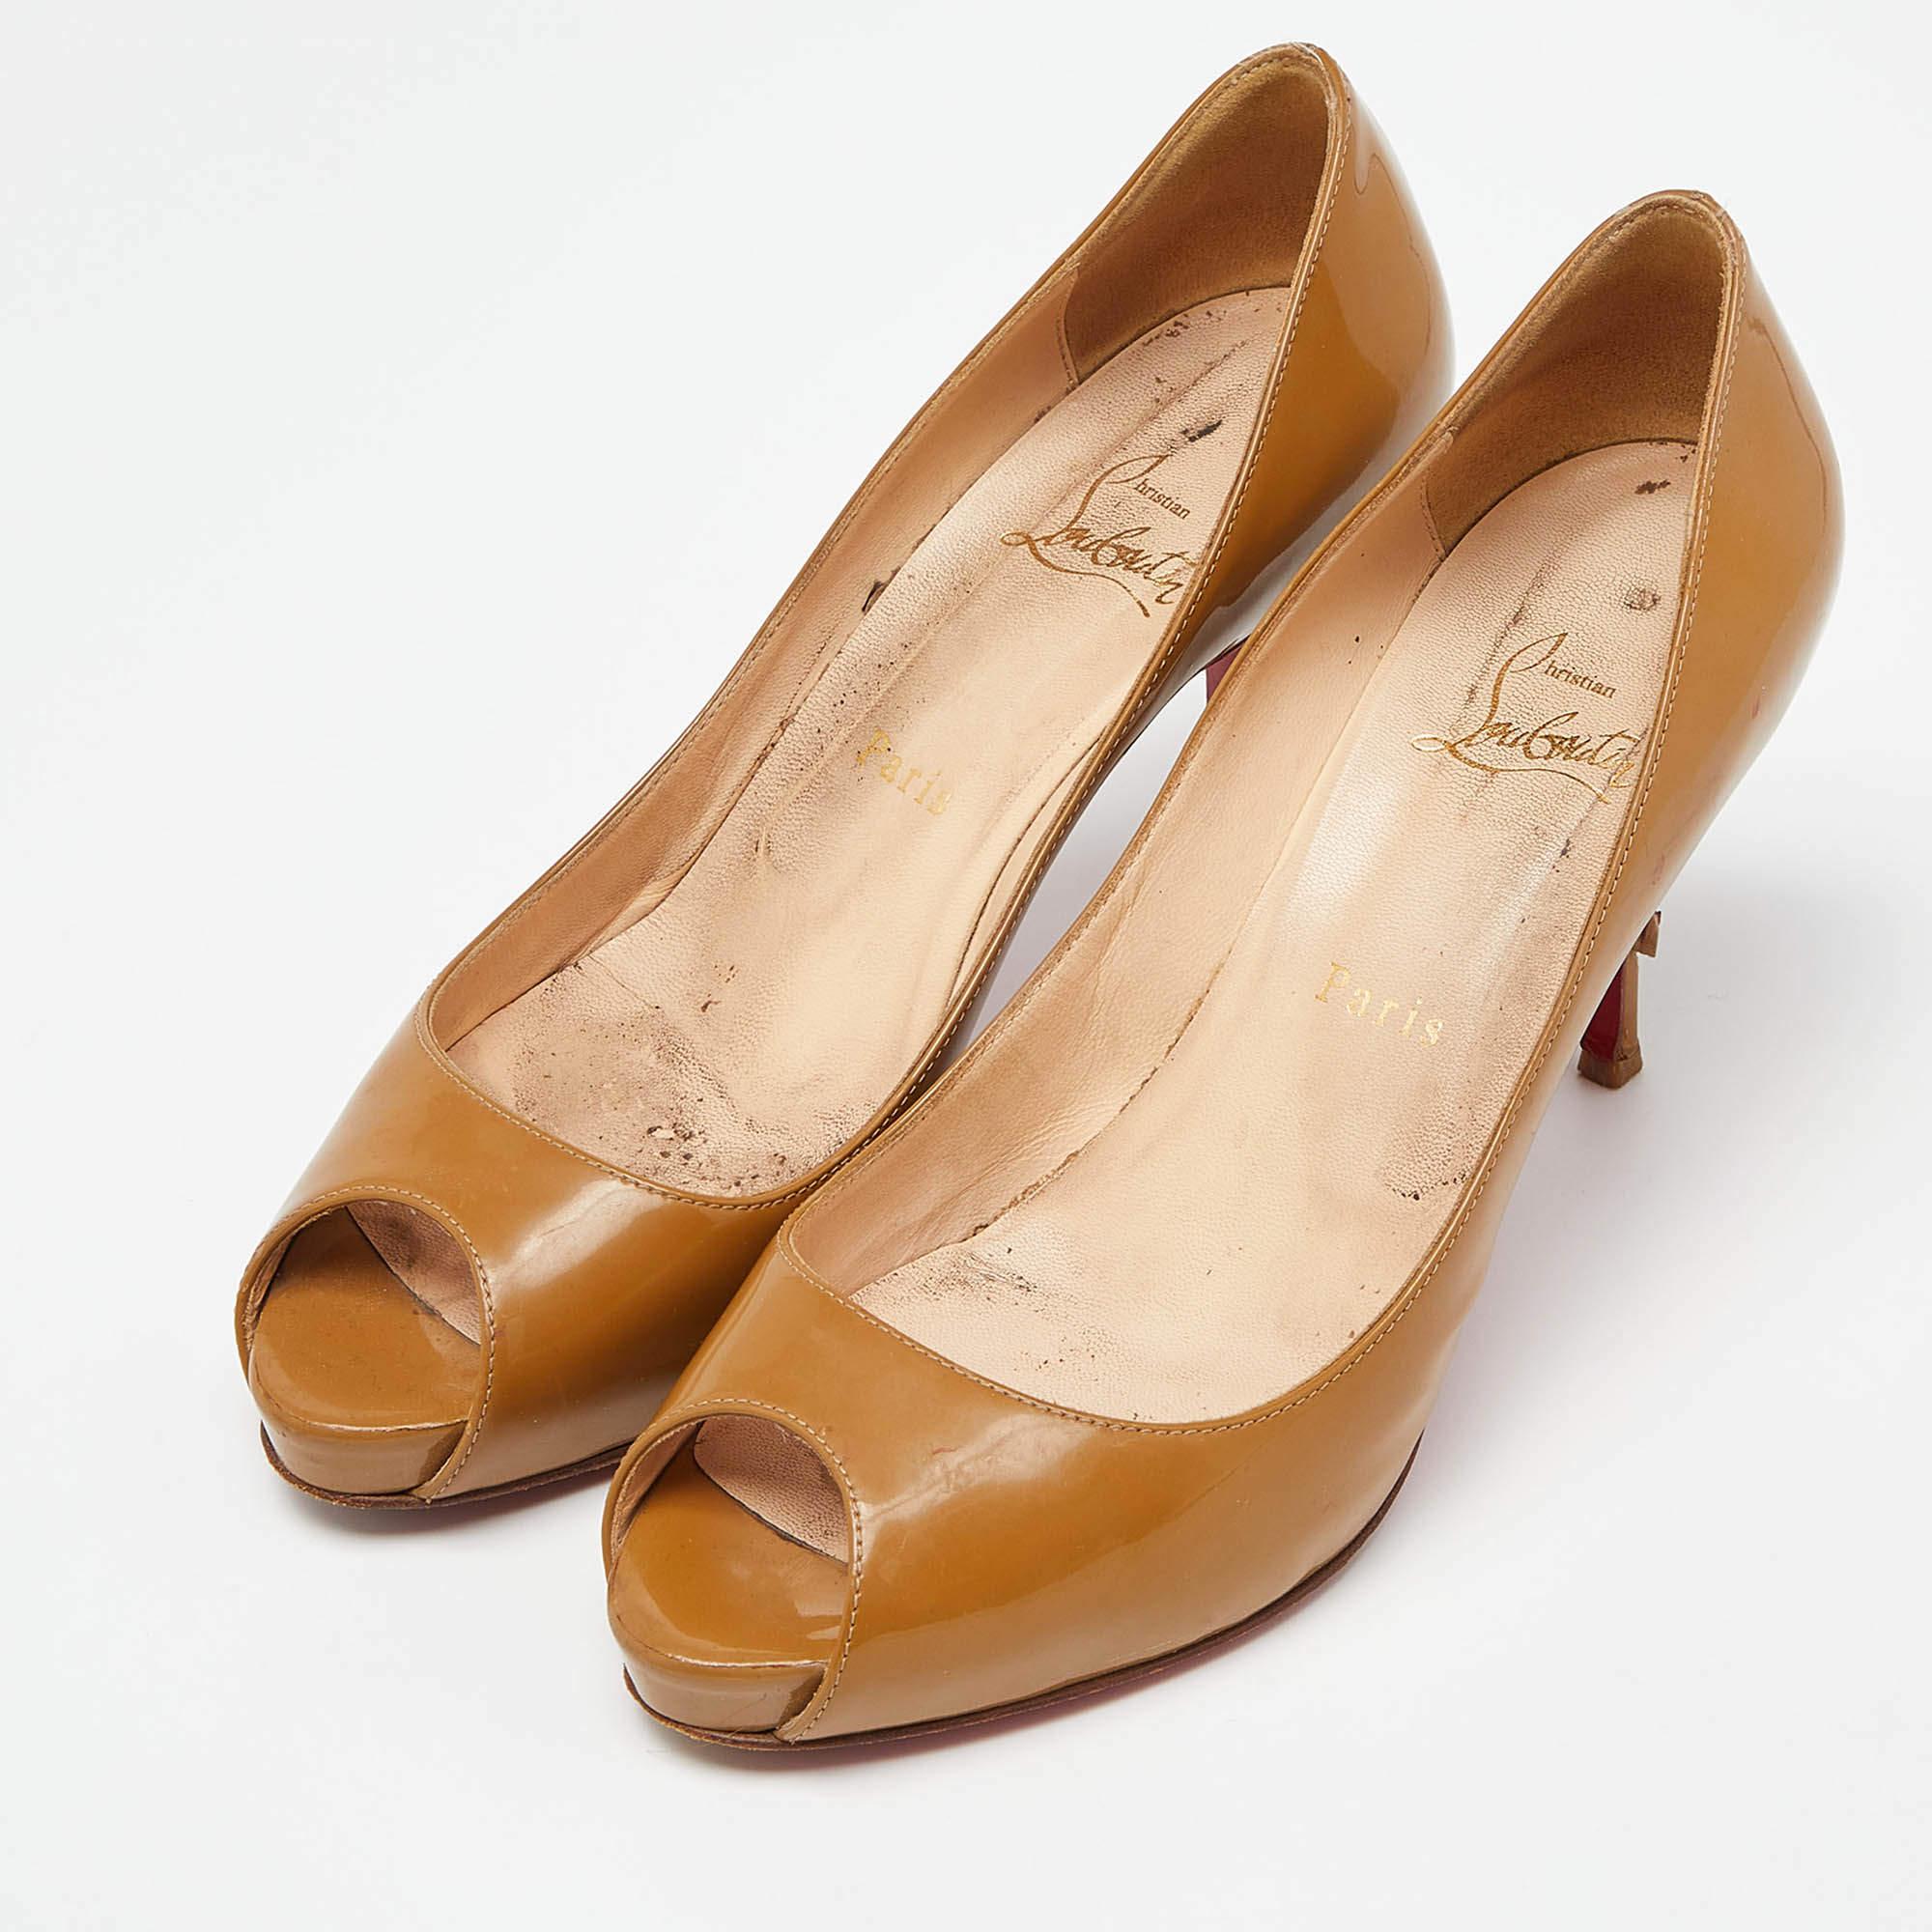 Christian Louboutin Beige Patent Leather Very Prive Pumps Size 38.5 For Sale 4